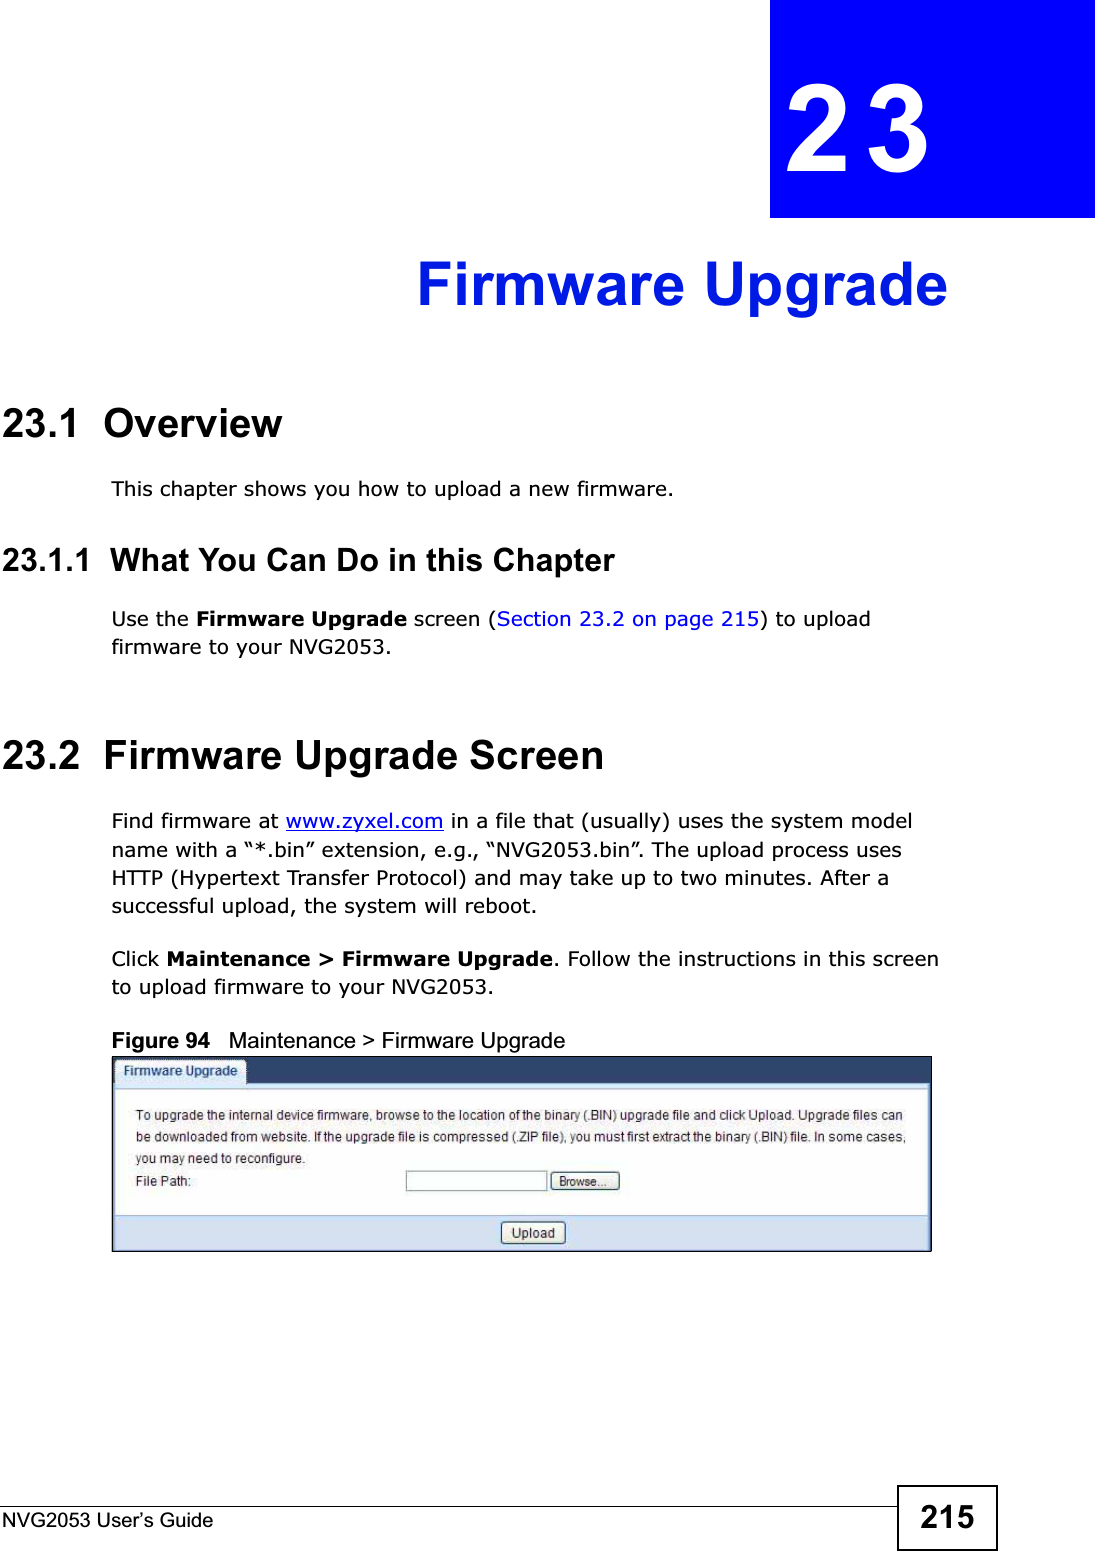 NVG2053 User’s Guide 215CHAPTER 23Firmware Upgrade23.1  OverviewThis chapter shows you how to upload a new firmware.23.1.1  What You Can Do in this ChapterUse the Firmware Upgrade screen (Section 23.2 on page 215) to upload firmware to your NVG2053.23.2  Firmware Upgrade ScreenFind firmware at www.zyxel.com in a file that (usually) uses the system model name with a “*.bin” extension, e.g., “NVG2053.bin”. The upload process uses HTTP (Hypertext Transfer Protocol) and may take up to two minutes. After a successful upload, the system will reboot.Click Maintenance &gt; Firmware Upgrade. Follow the instructions in this screen to upload firmware to your NVG2053. Figure 94   Maintenance &gt; Firmware Upgrade 